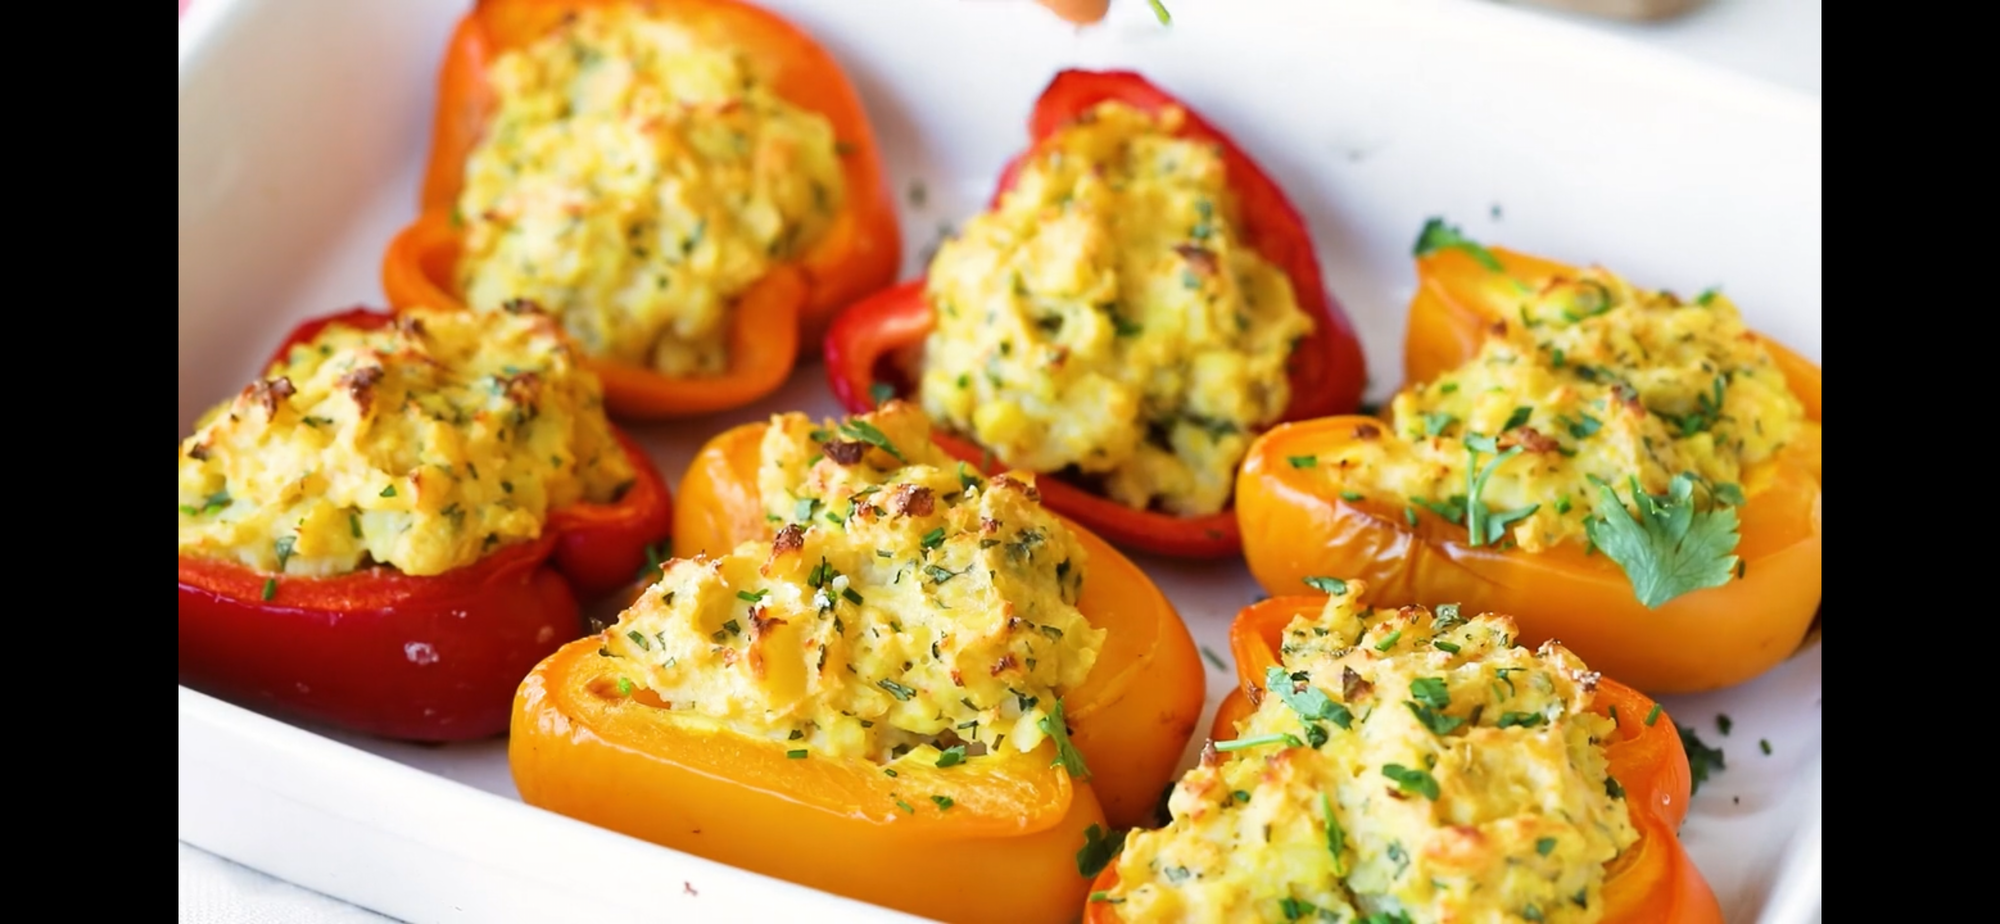 Potato and Herb Stuffed Peppers